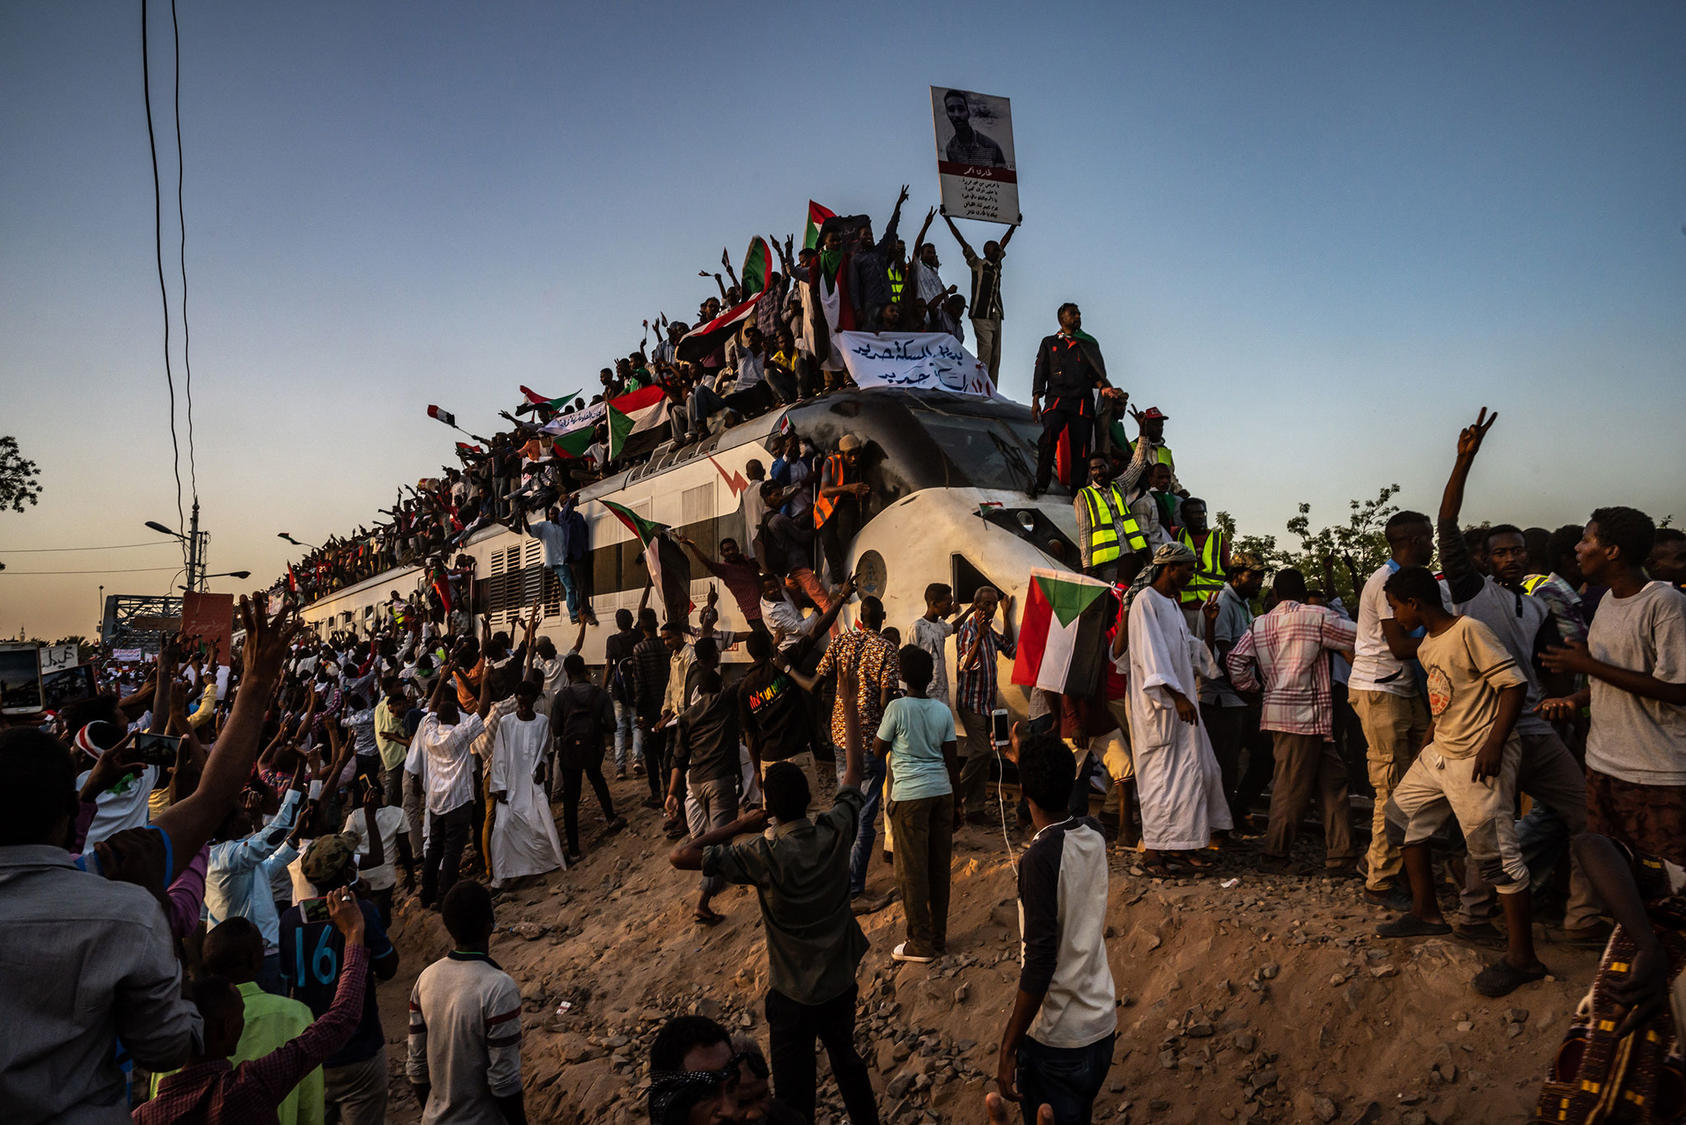 Protesters arrive in Sudan’s capital of Khartoum, April 23, 2019. The Sudanese deposed a dictator, but some fear true stability can never come until the truth is revealed about who killed more than a hundred protesters. (Bryan Denton/The New York Times)